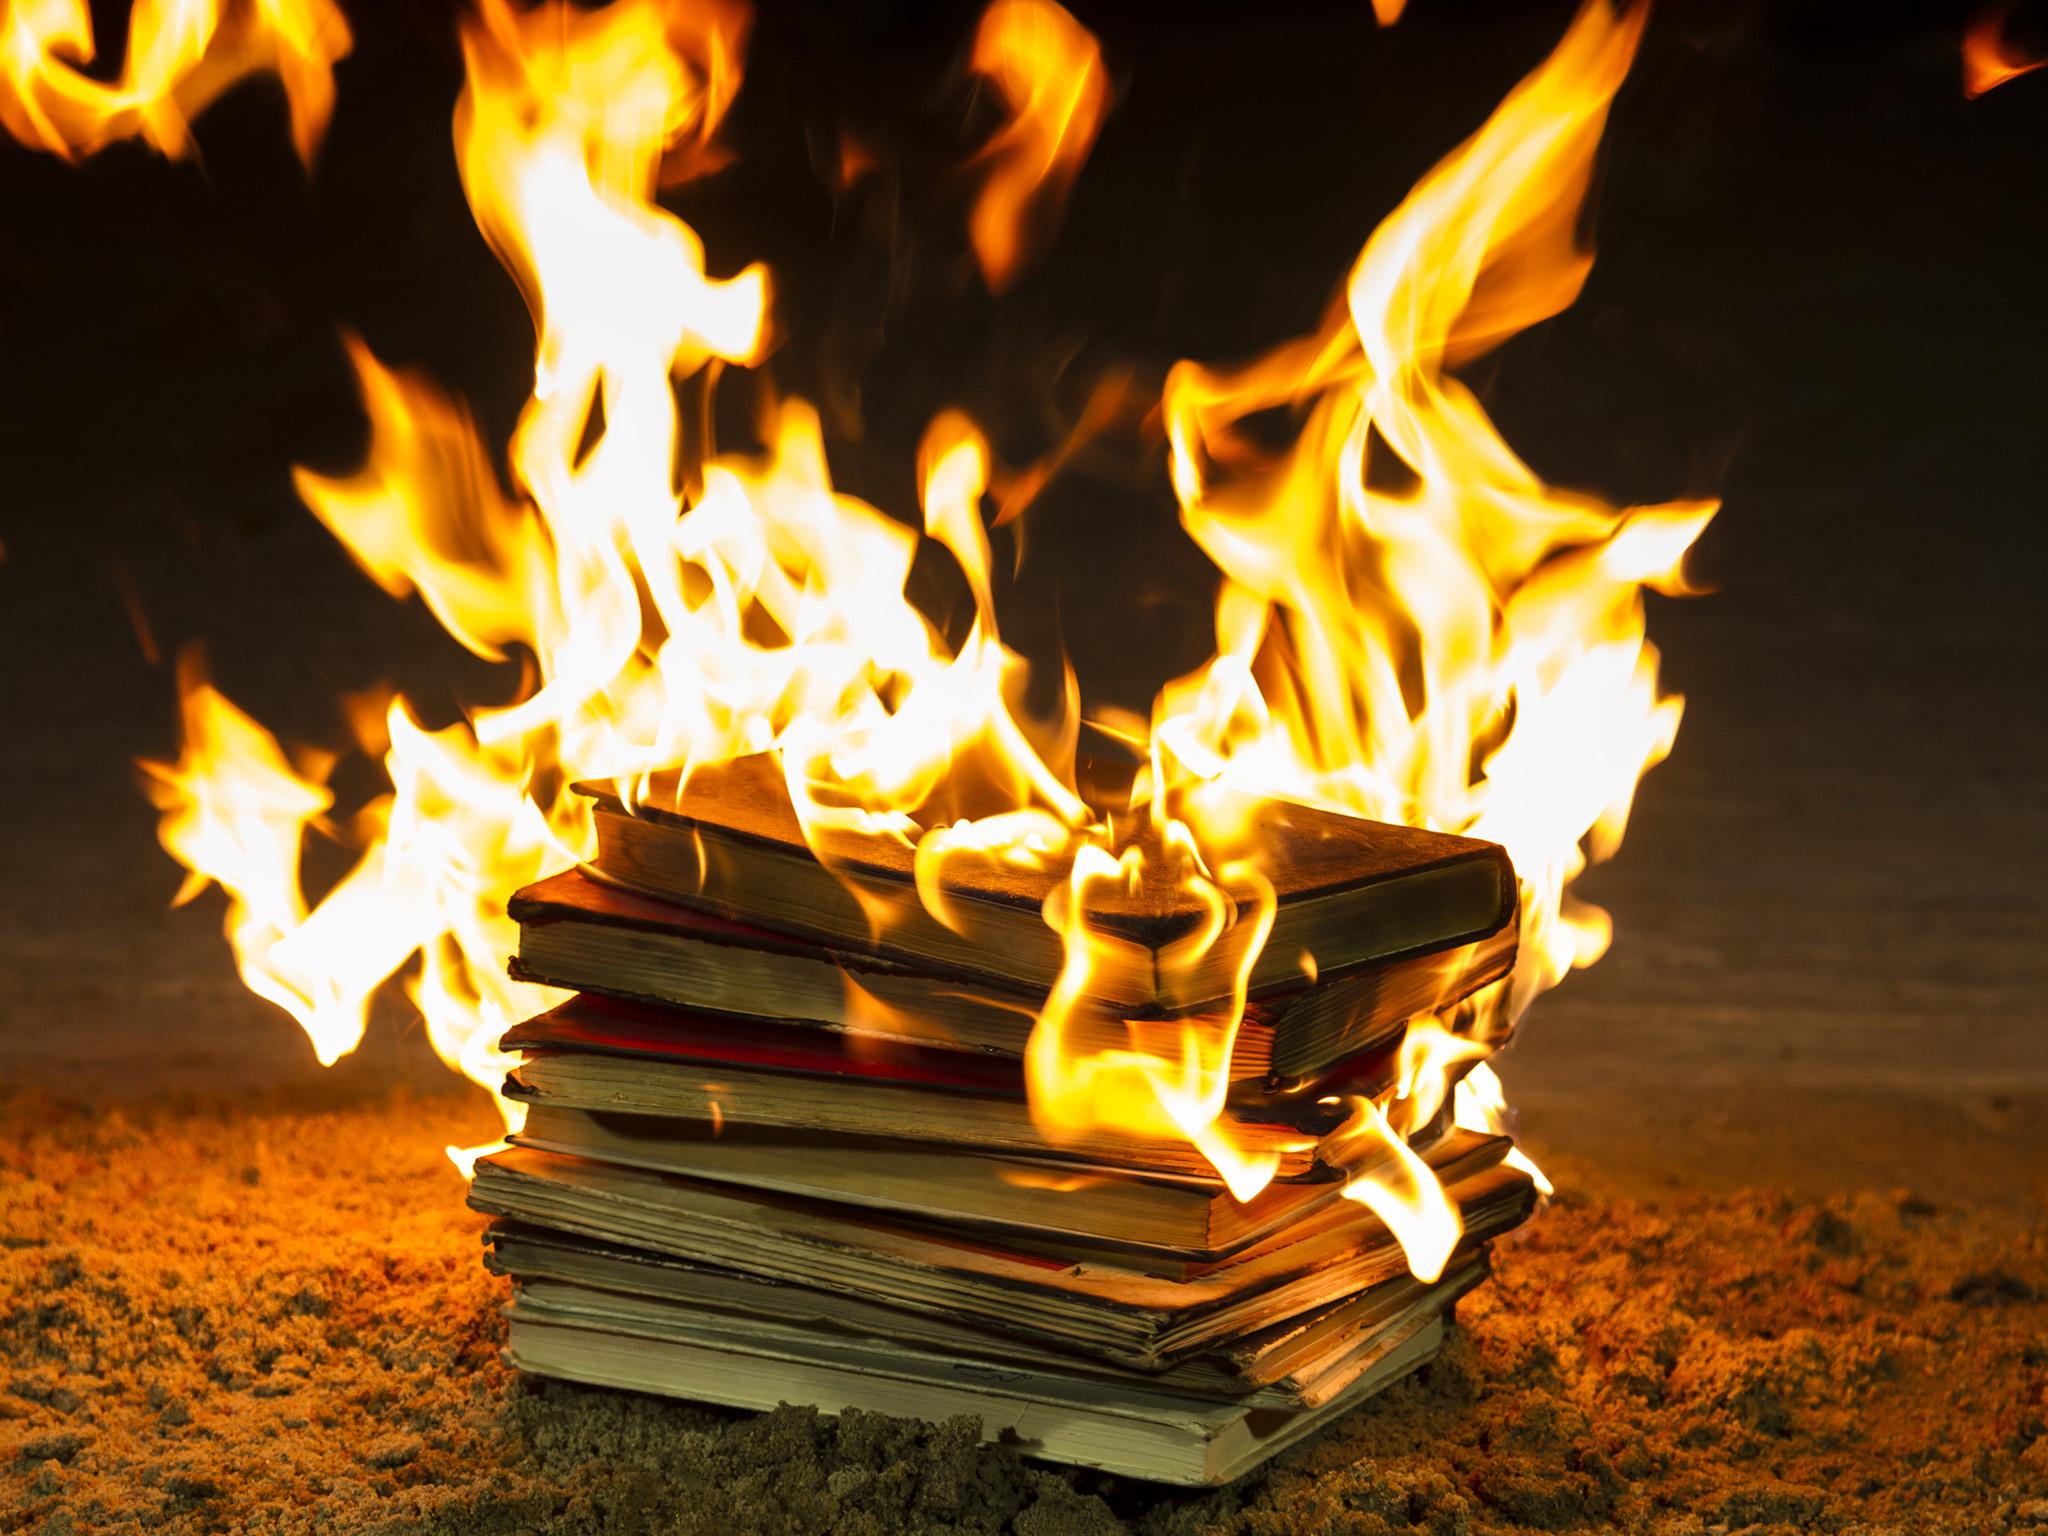 Students burn book after talk on white privilege by Hispanic author